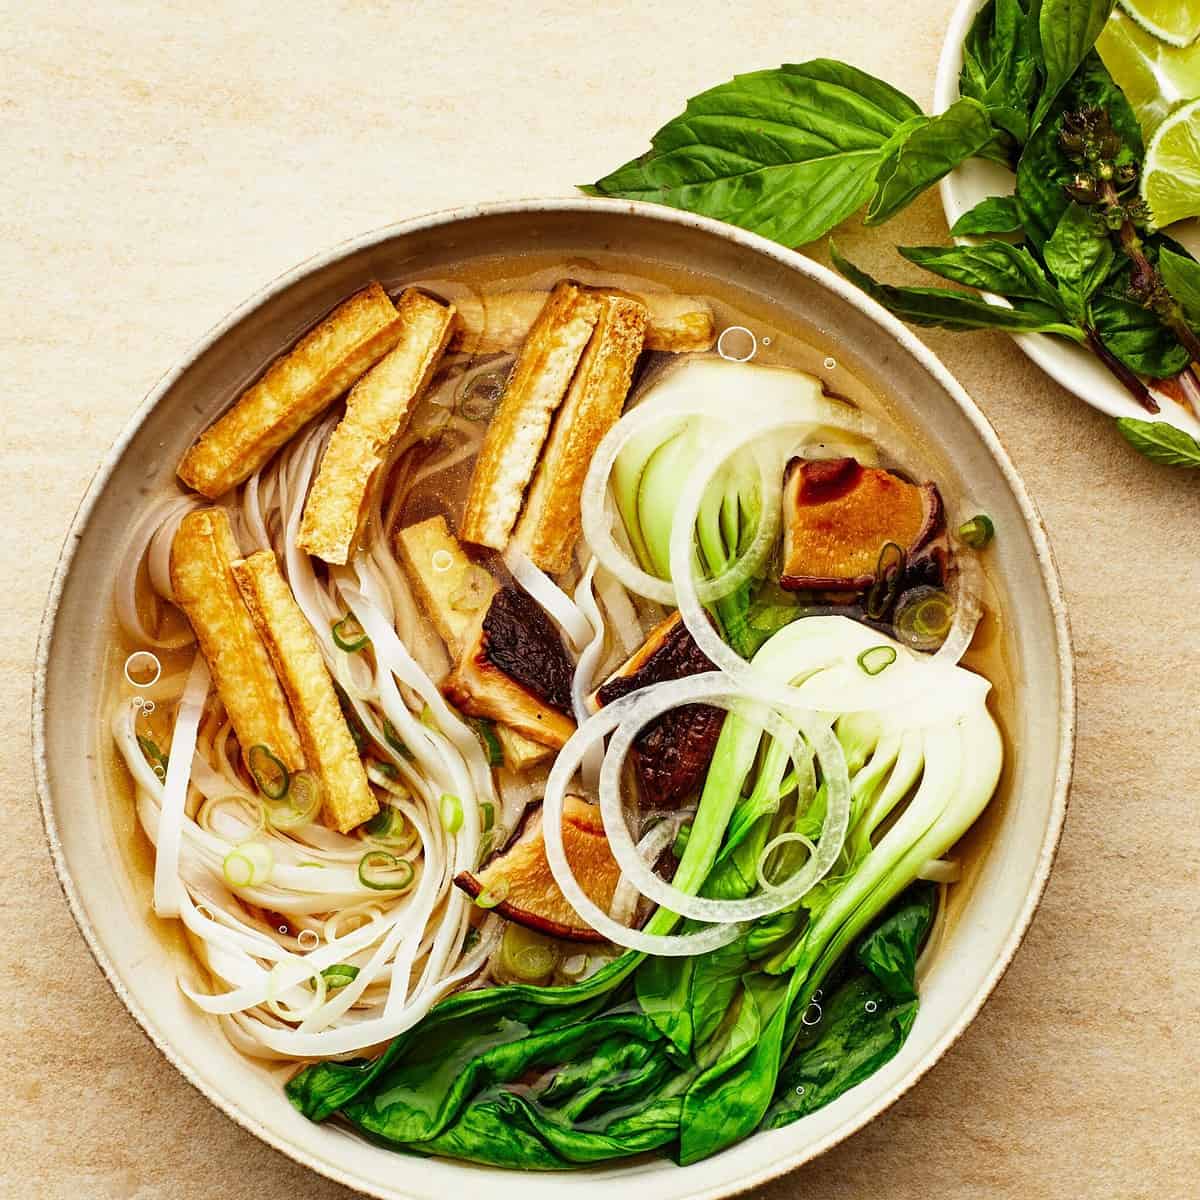  Dive into a bowl of this nourishing Vegetarian Vietnamese Broth.